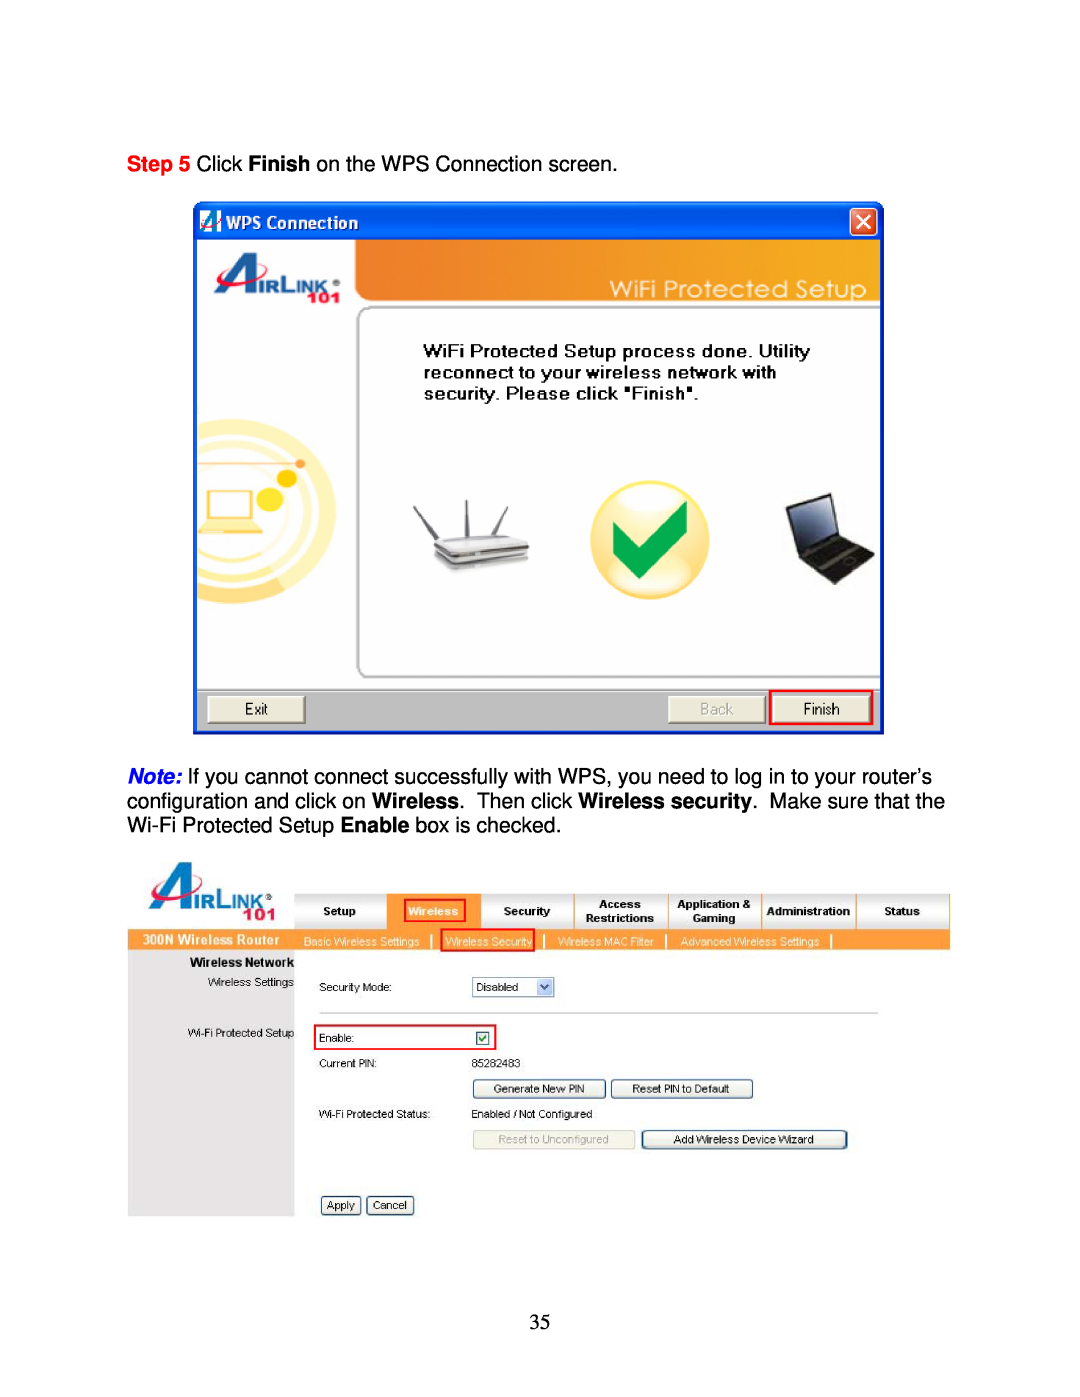 Airlink101 AWLL6090 user manual Click Finish on the WPS Connection screen 